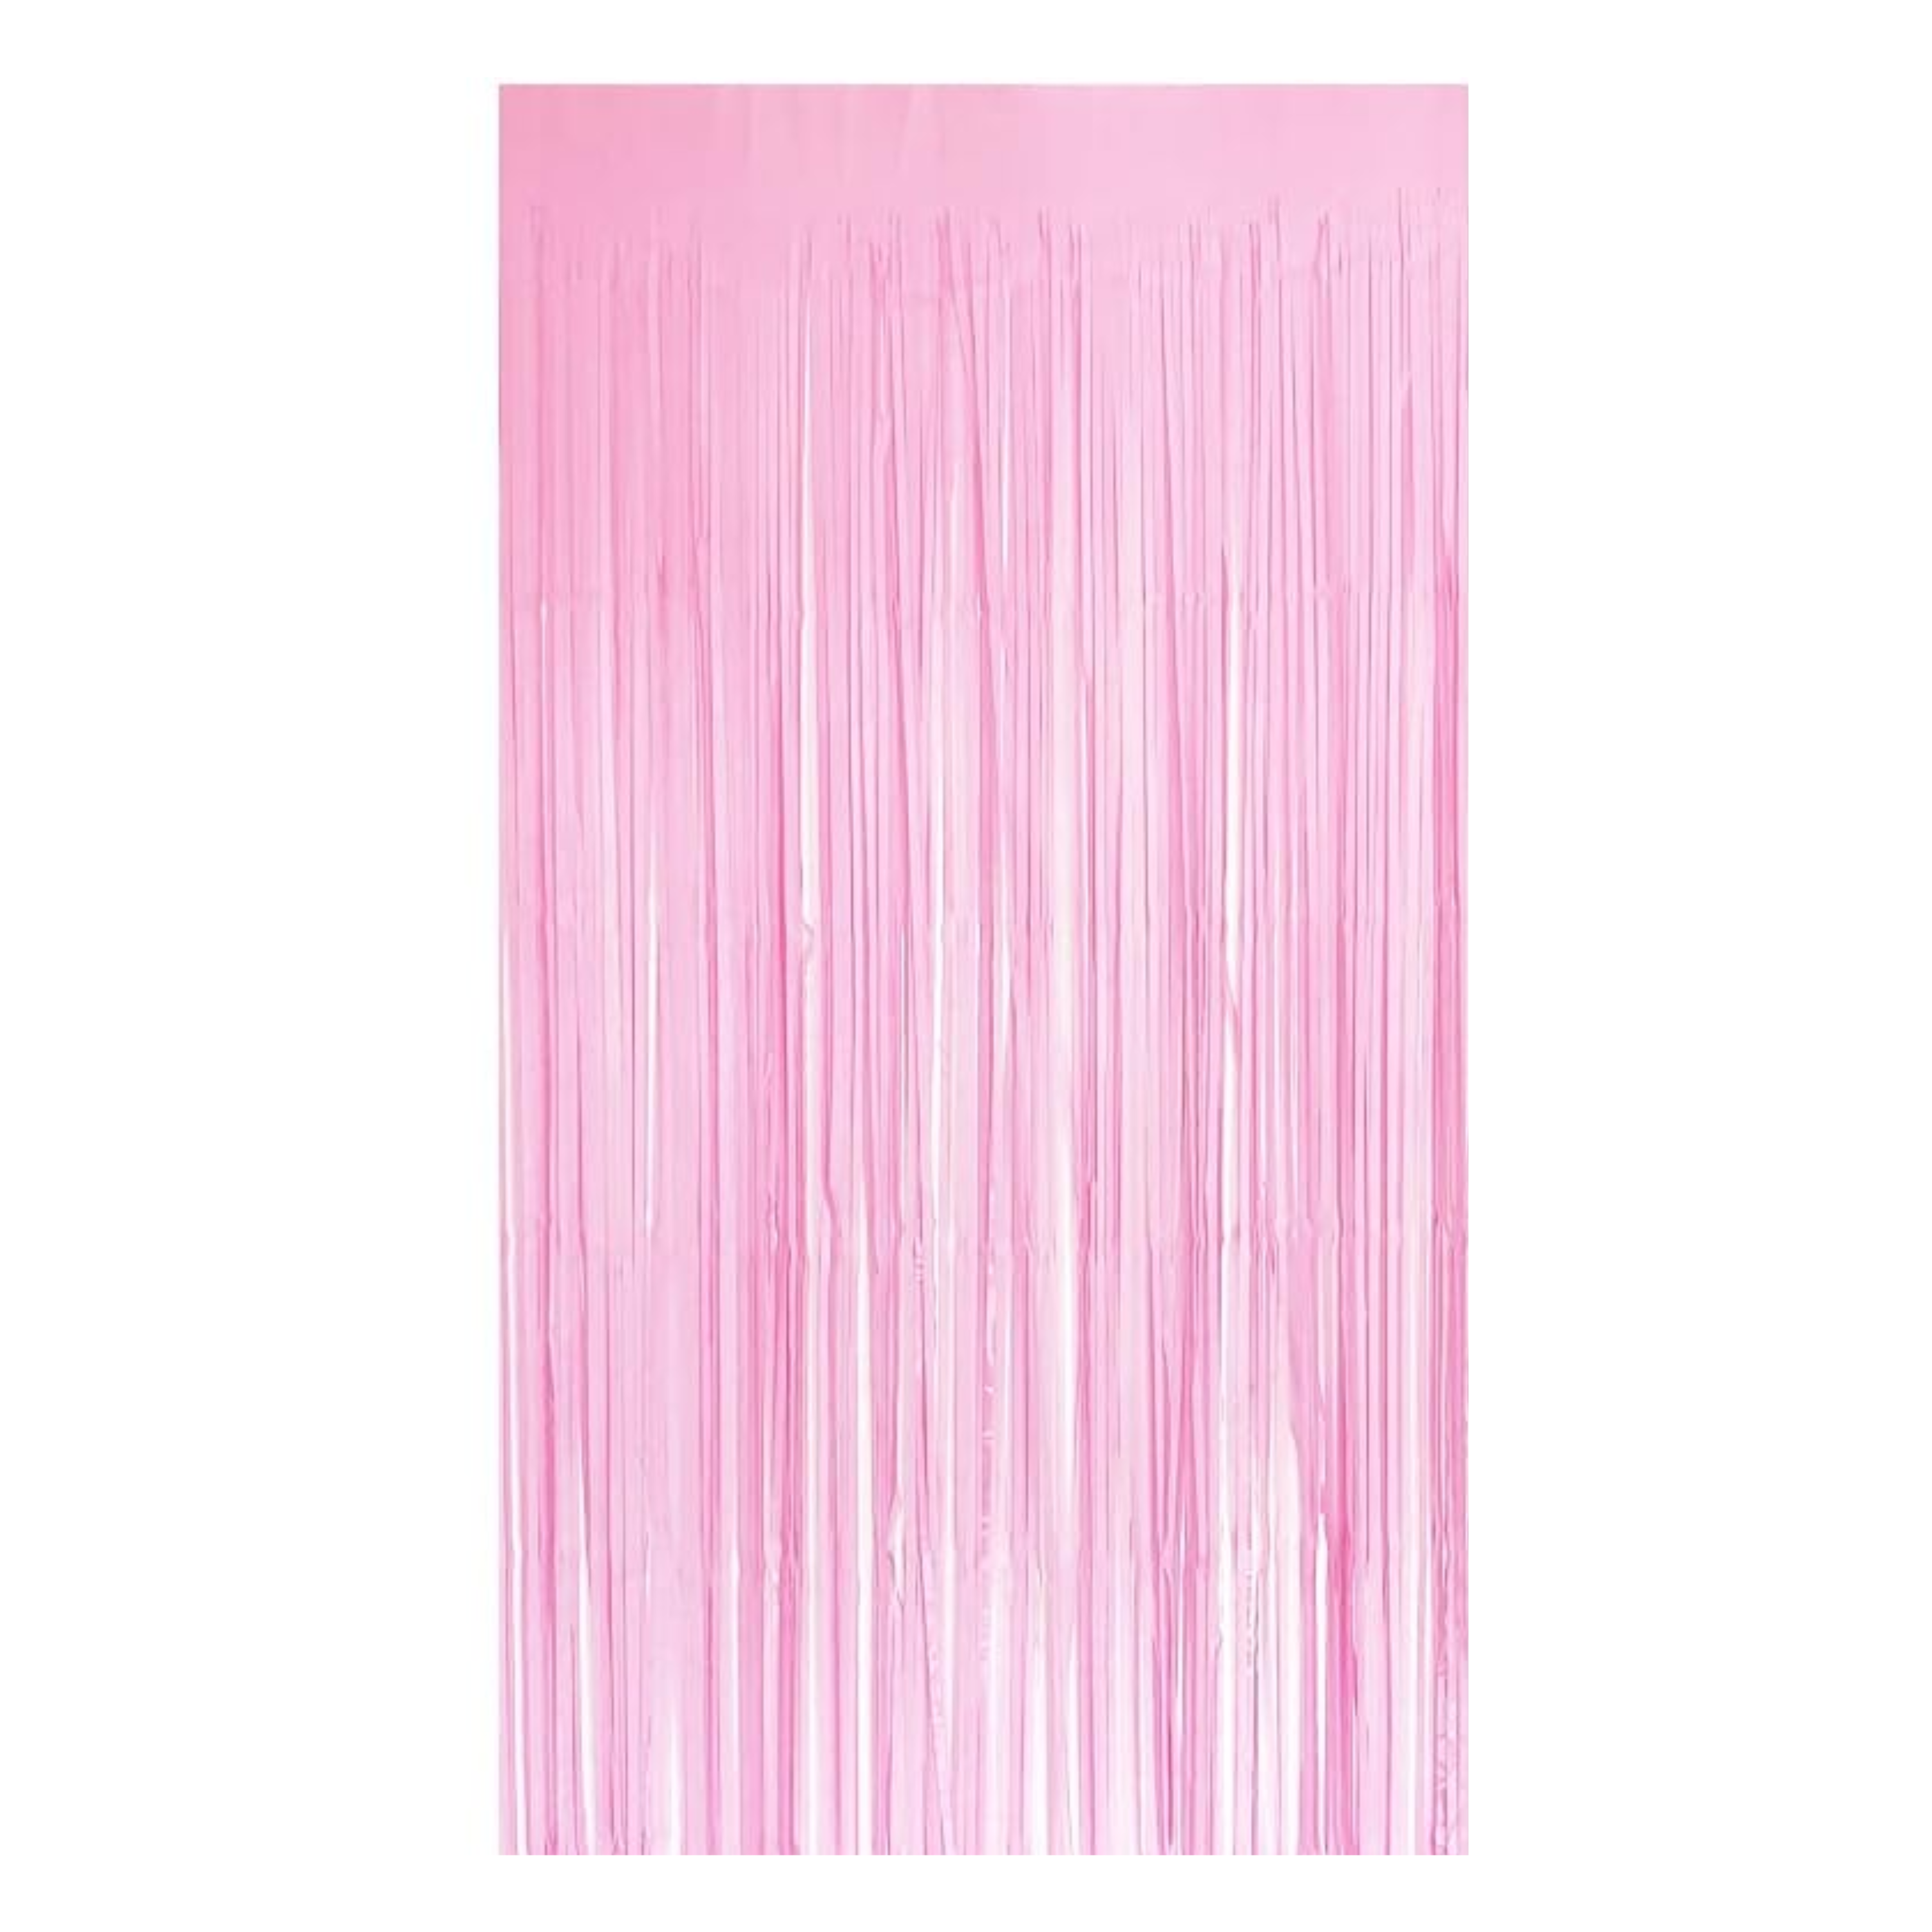 Pastel Curtain Pink 3ft x 6ft - 1 Ct.